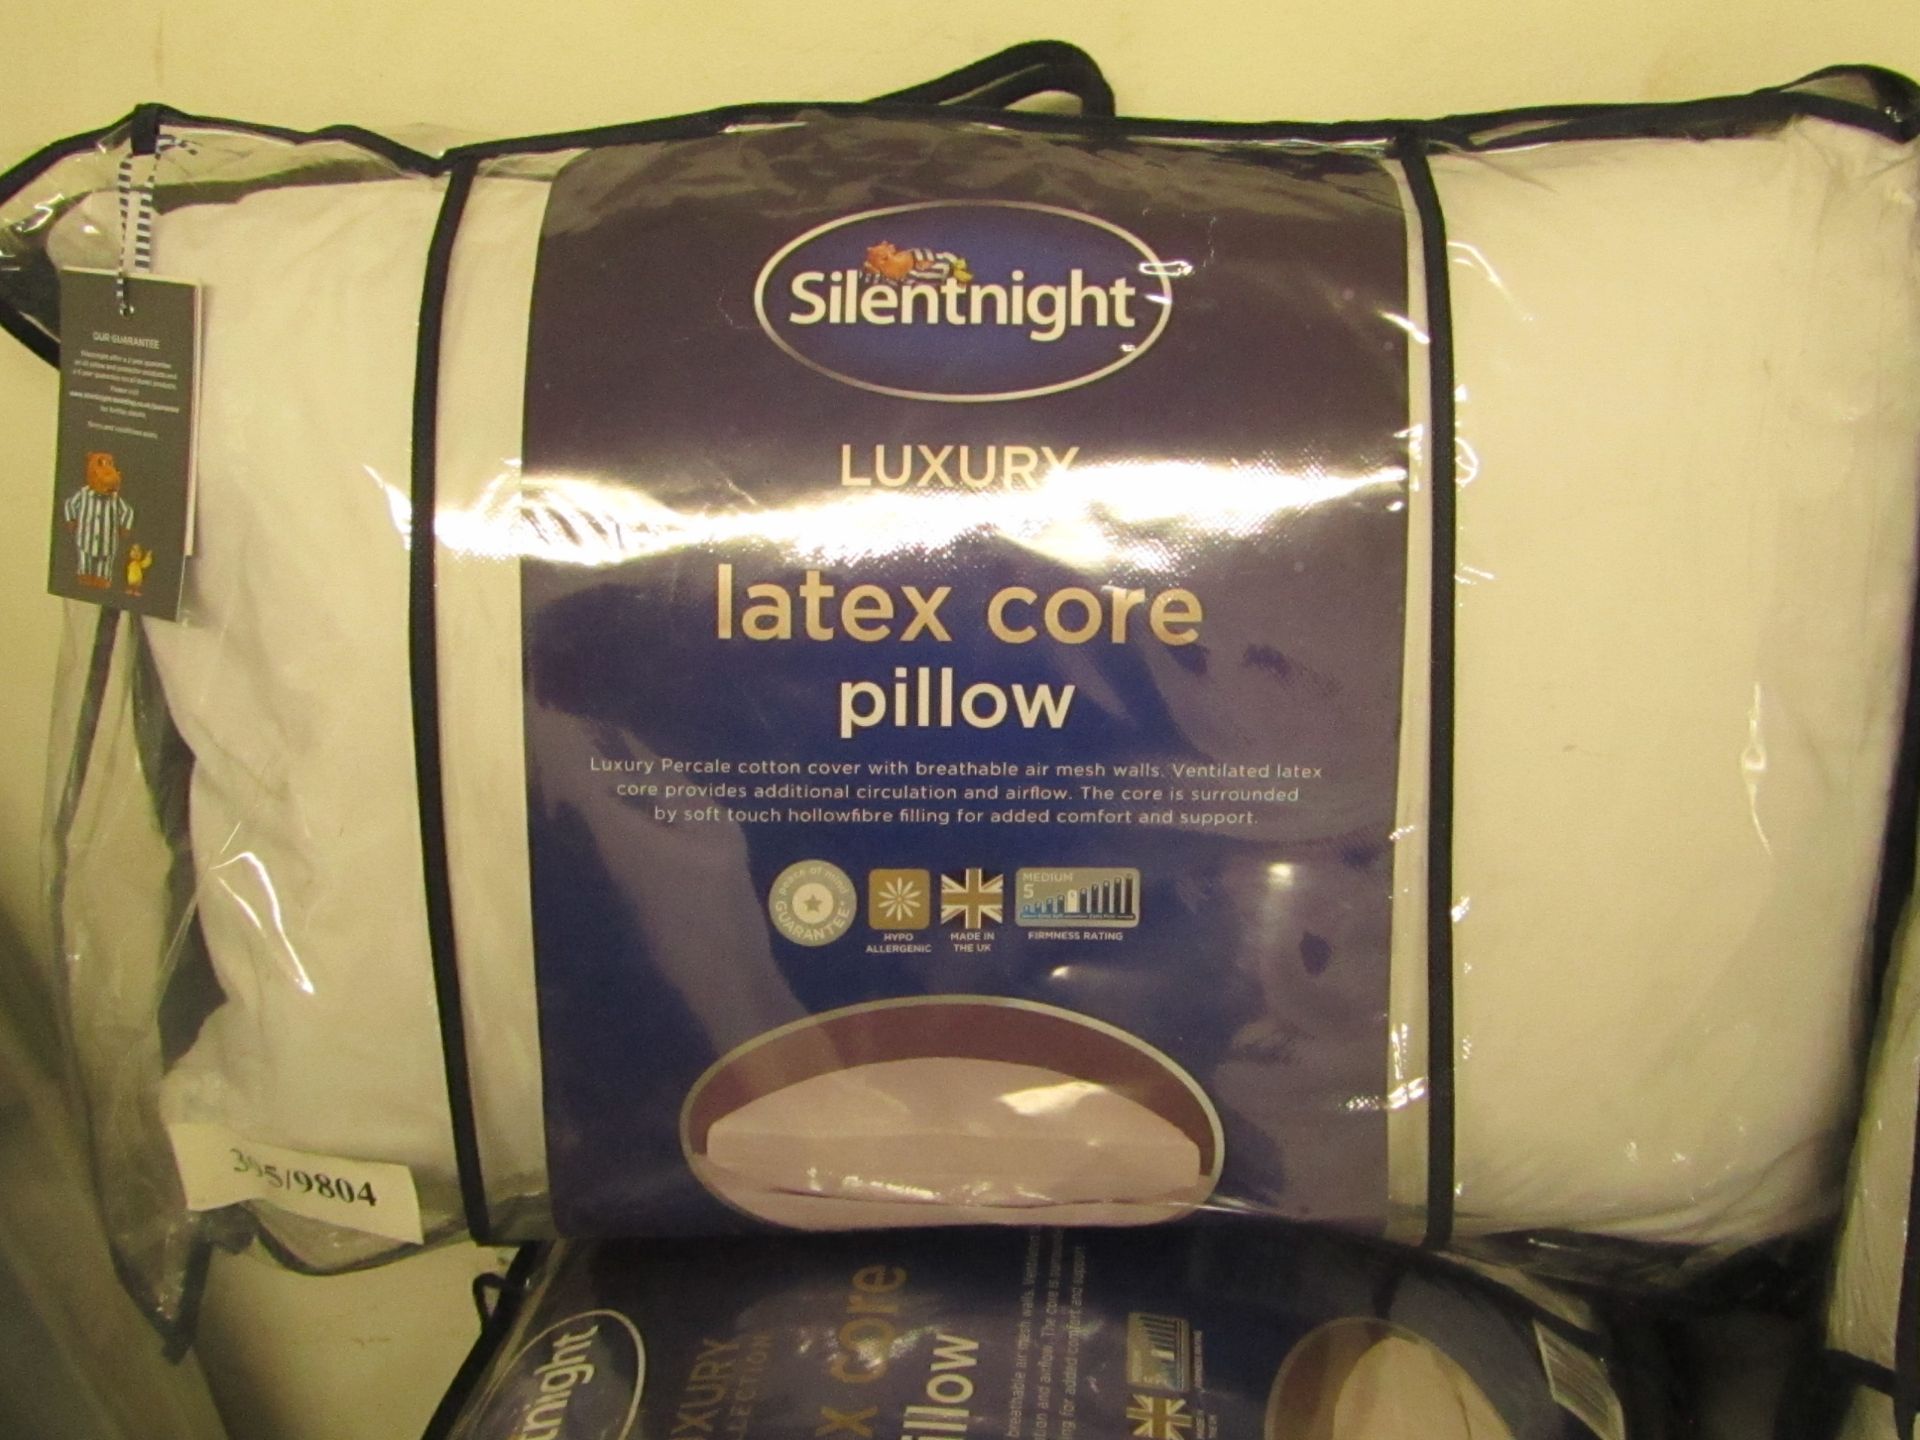 Silent Night Luxury Collection latex core pillow, brand new and packaged. RRP £29.99